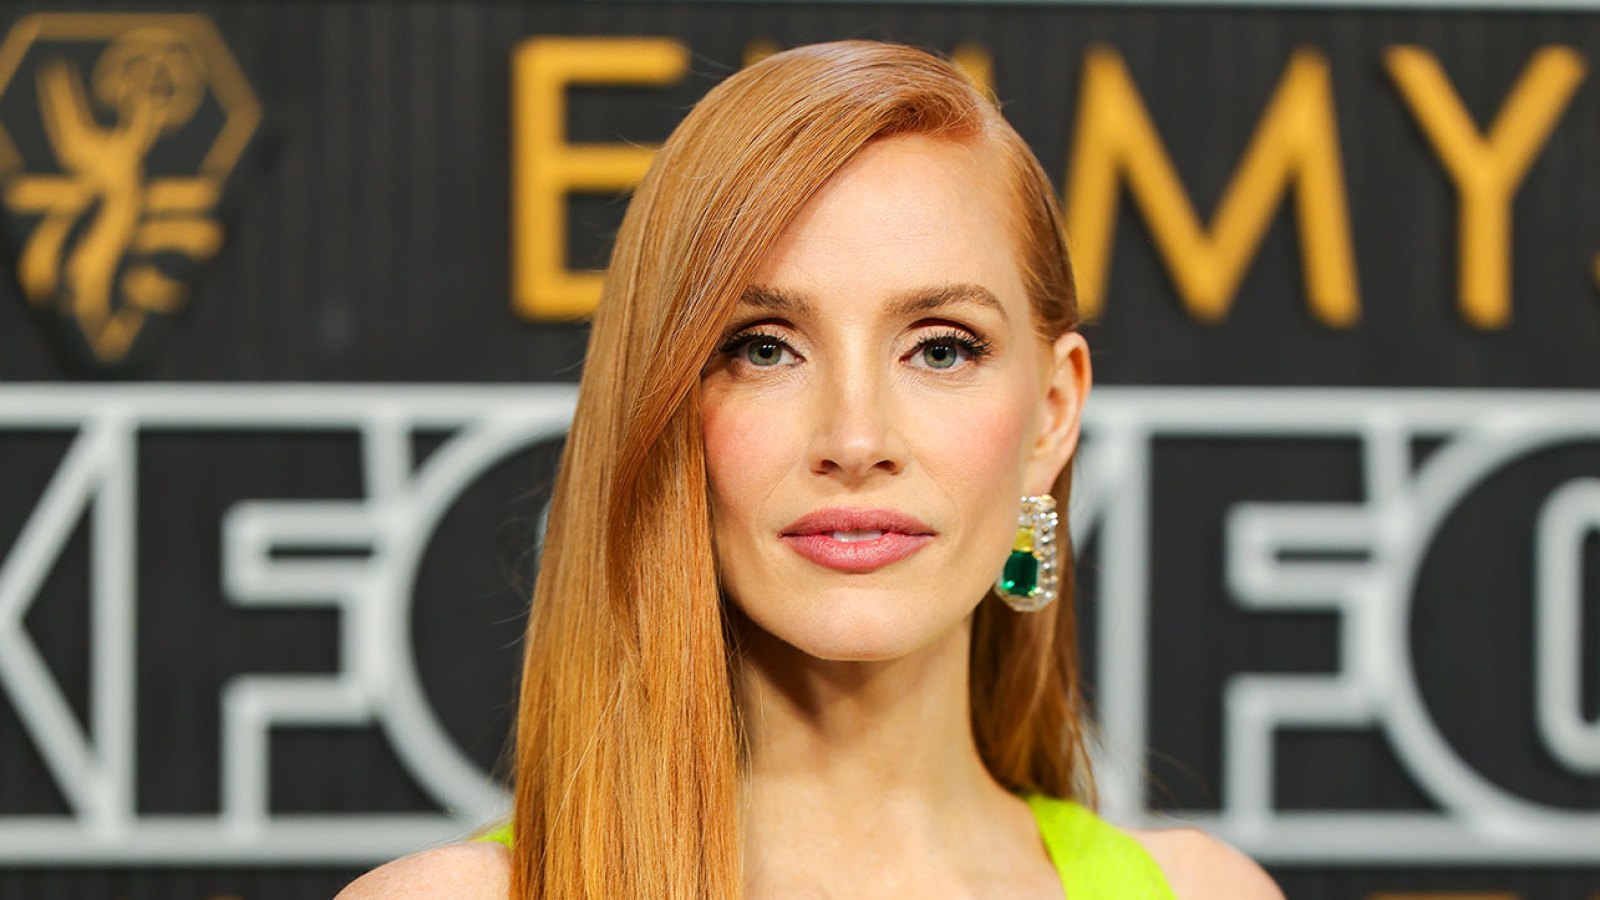 Jessica Chastain Is Lovely in Lime Green Gown 2023 Emmys Red Carpet